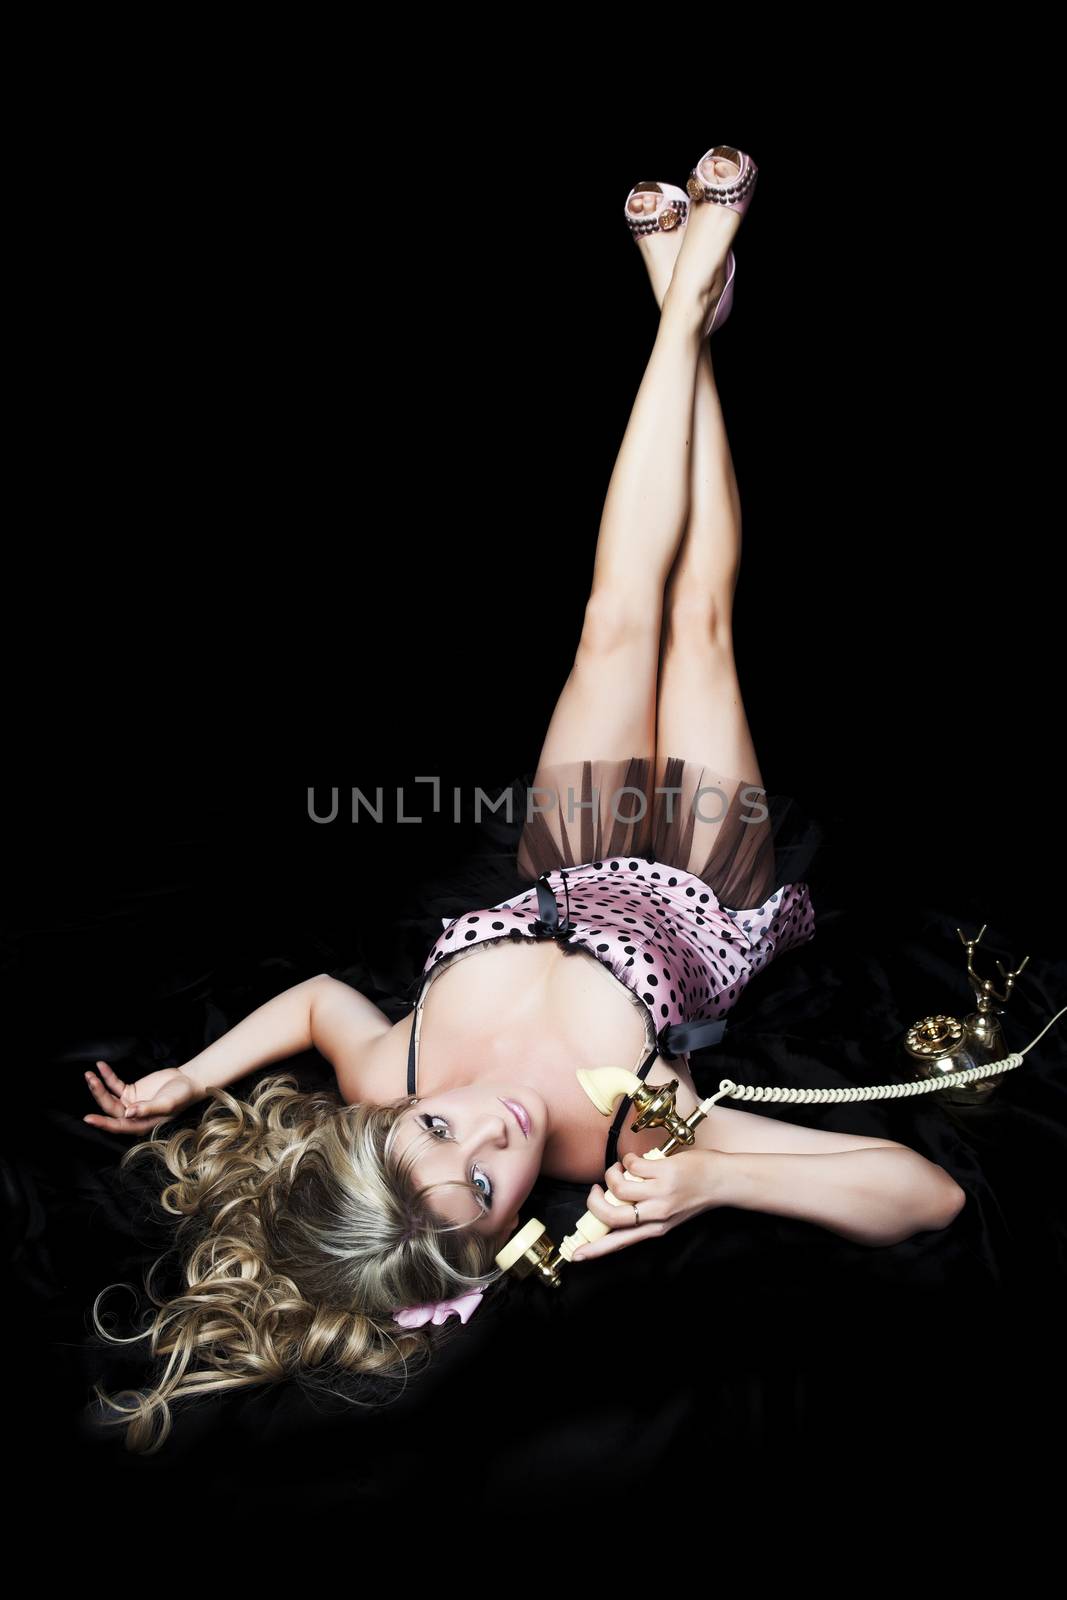 Pretty blond pinup girl in classic pose with telephone.  Black background.